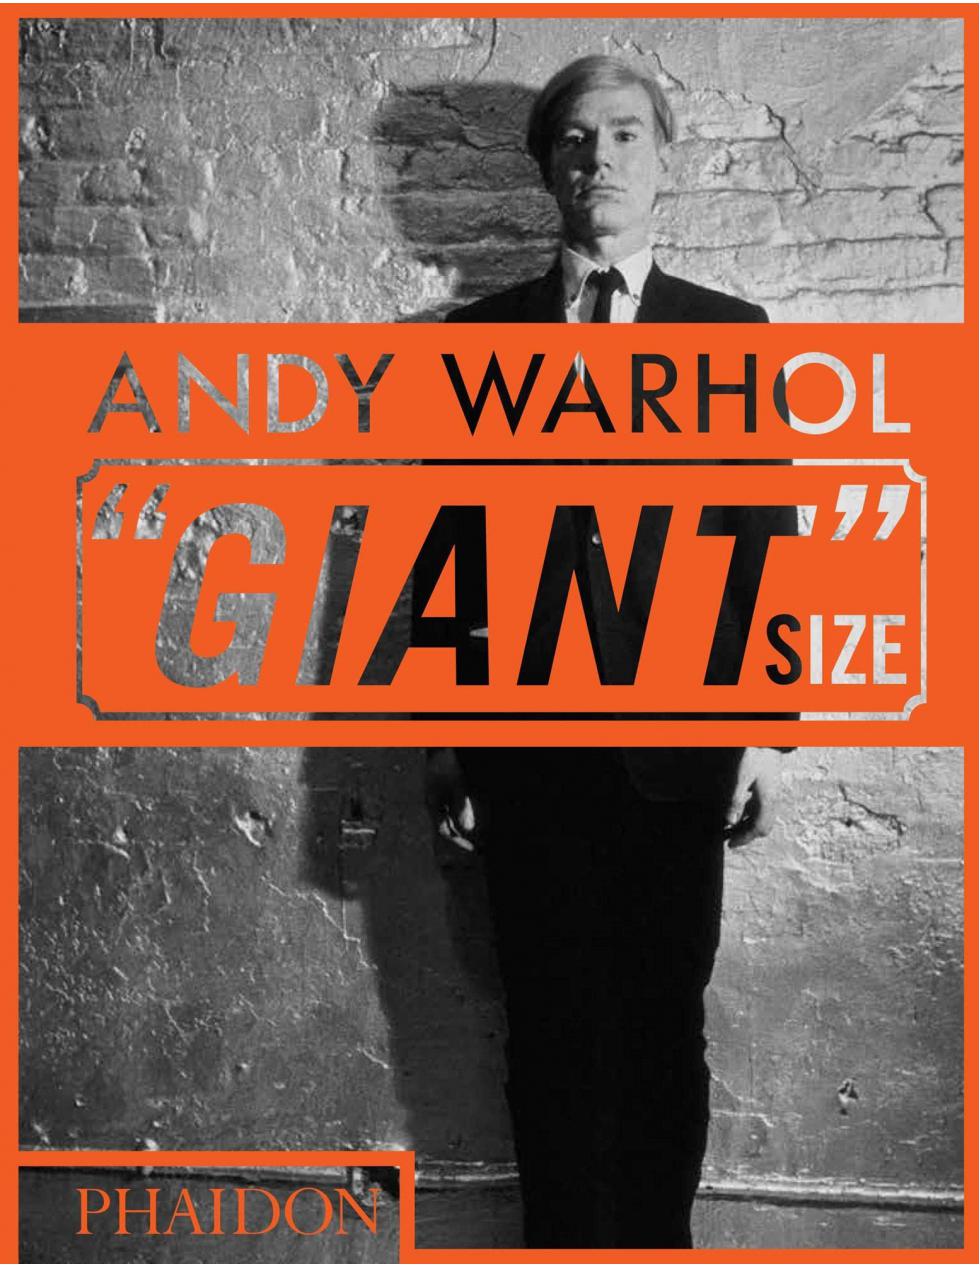 Book: ANDY WARHOL - "Giant" Size